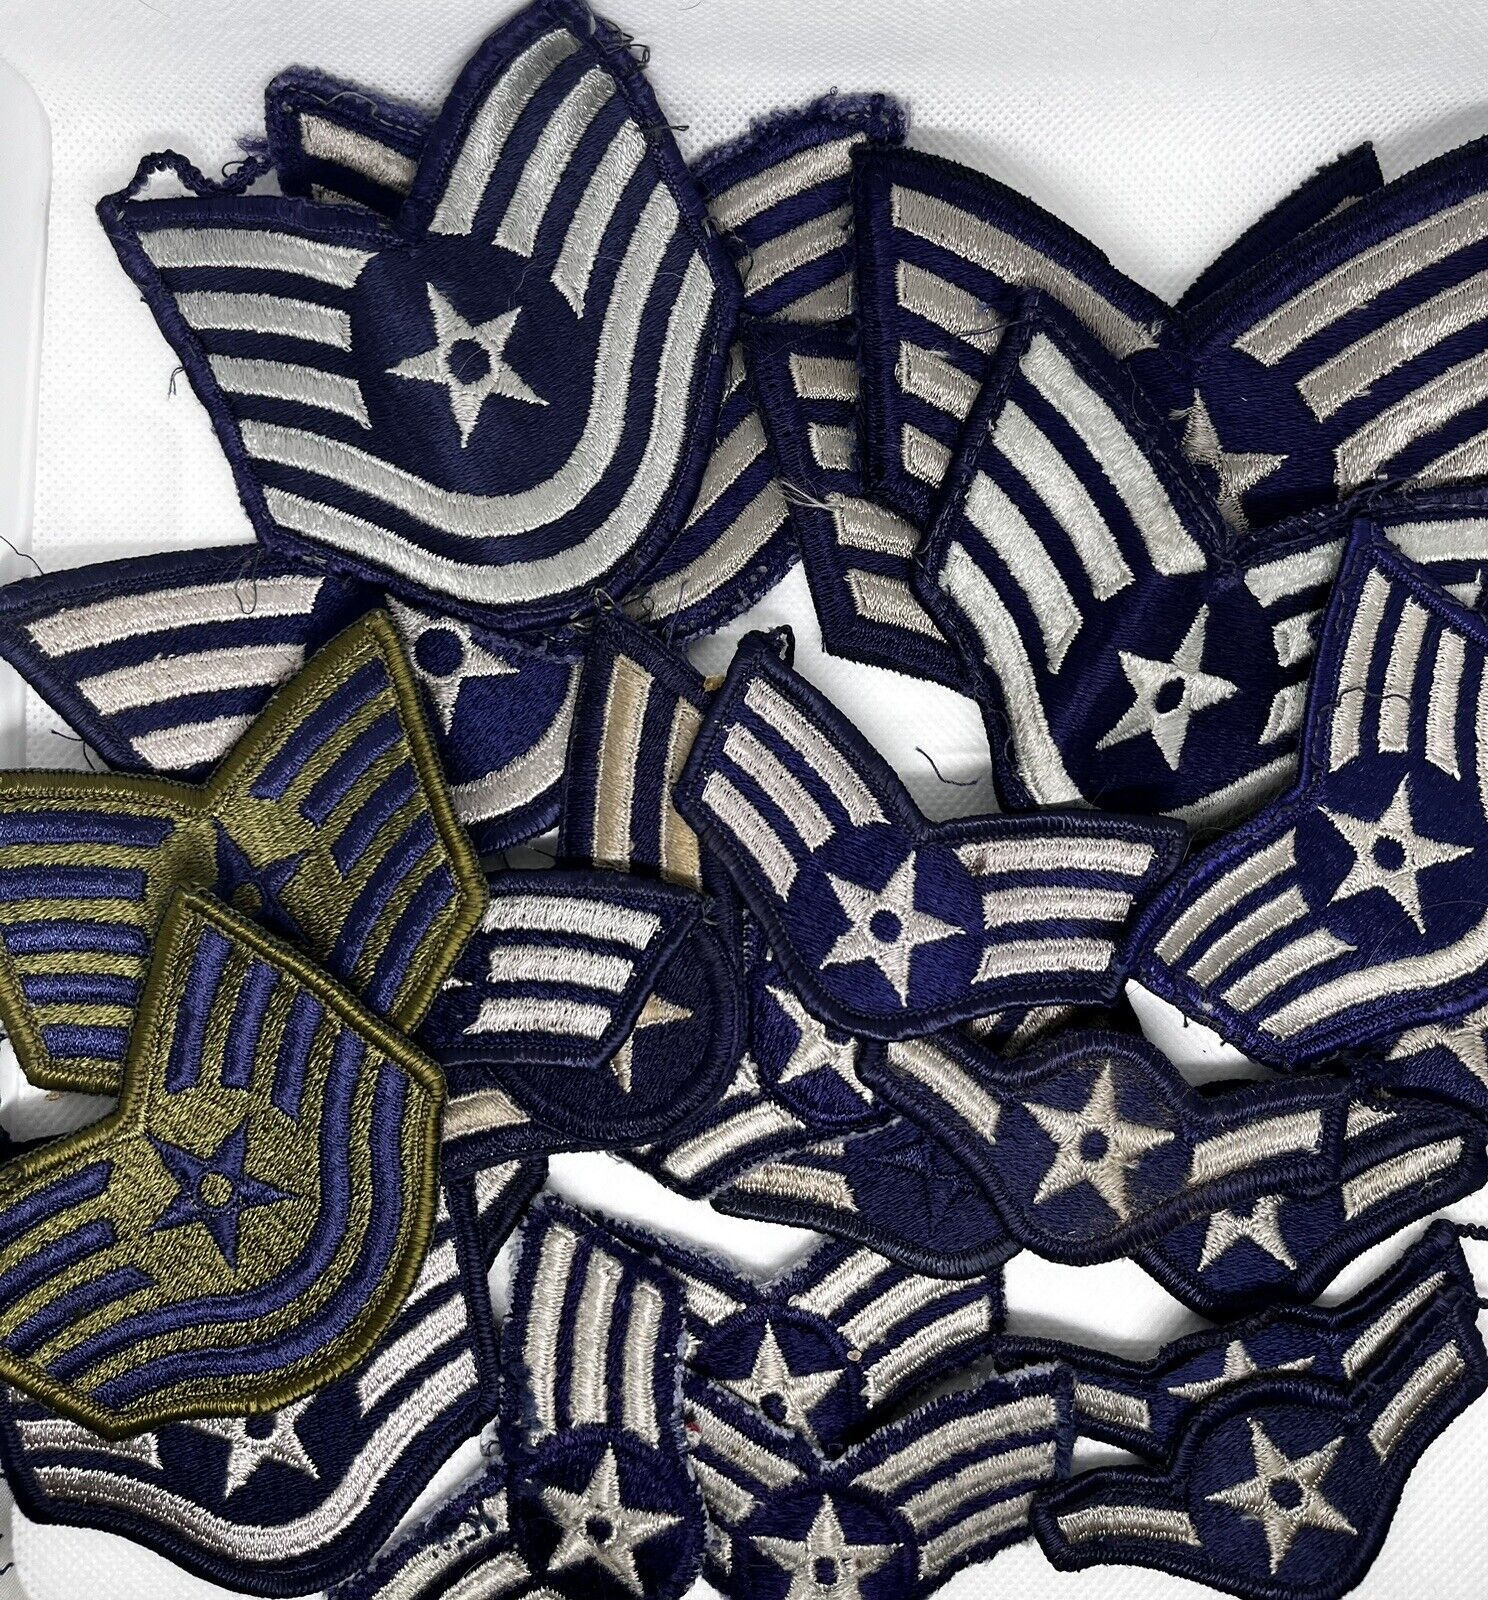 US Airforce Rank Insignia (Multiple Ranks) Shoulder Patches | Pack of 24